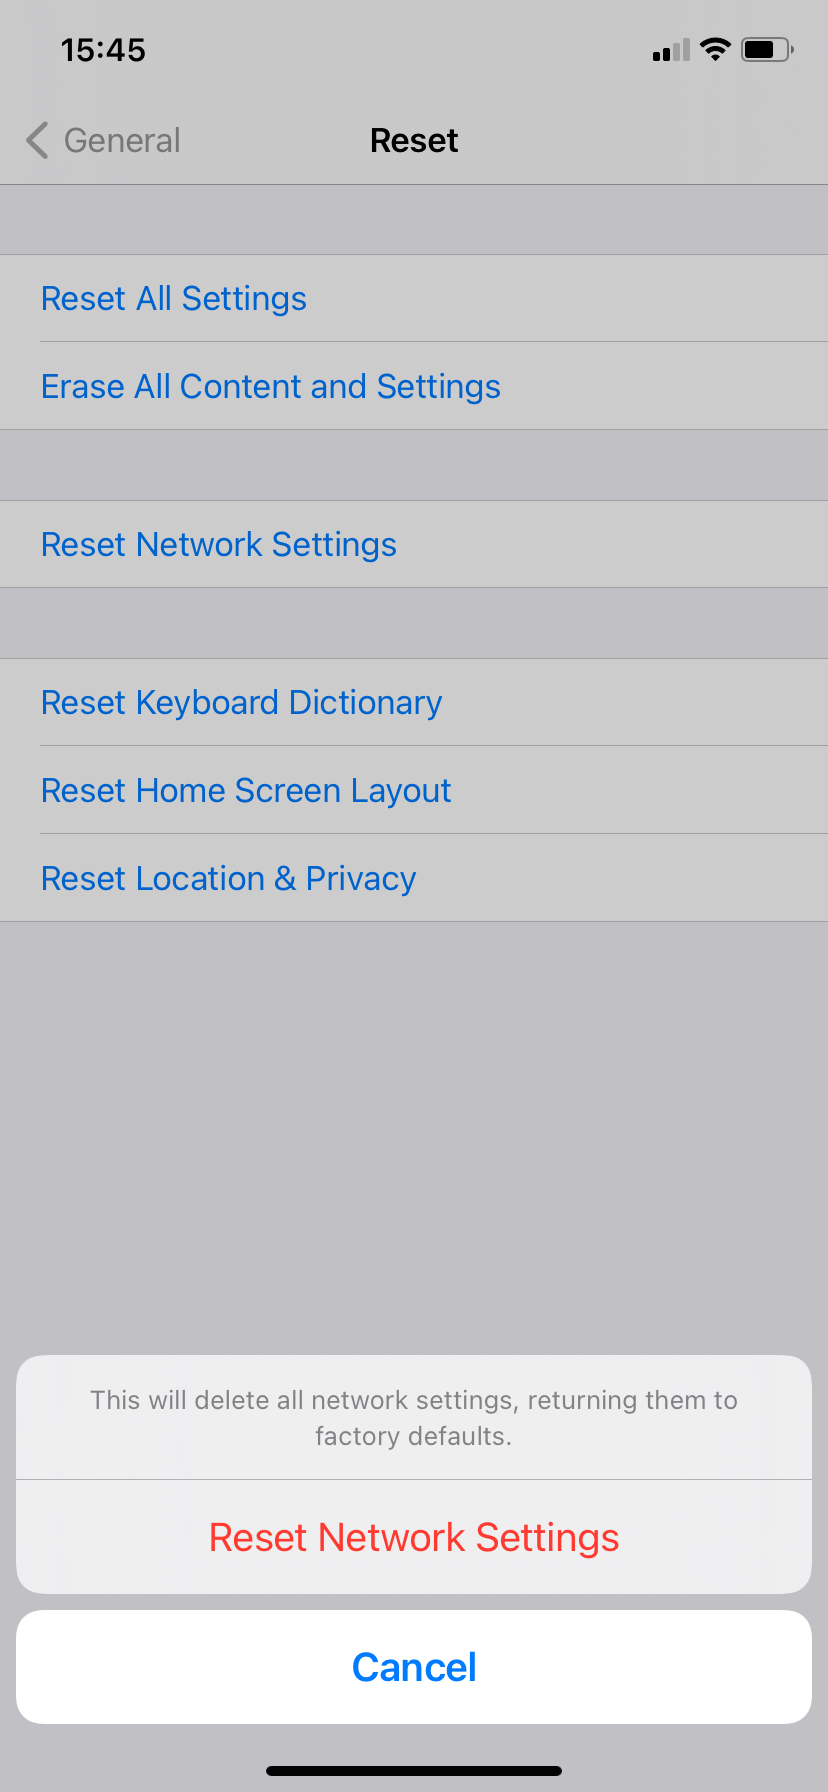 Reset network settings confirmation on iOS